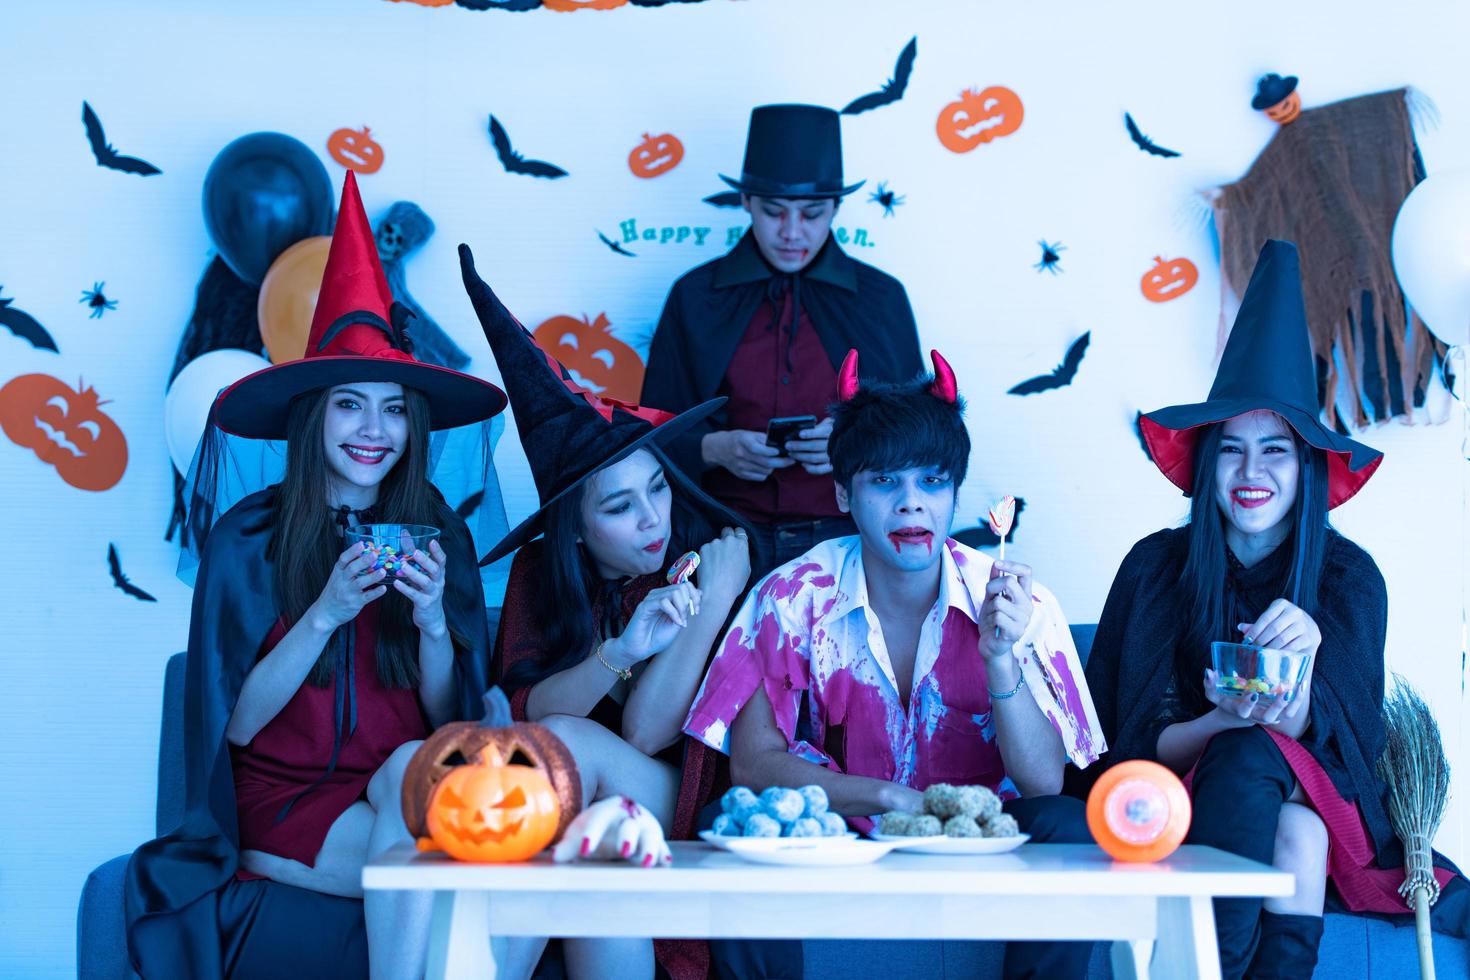 Asian young people in costumes attend celebrate at Halloween party photo